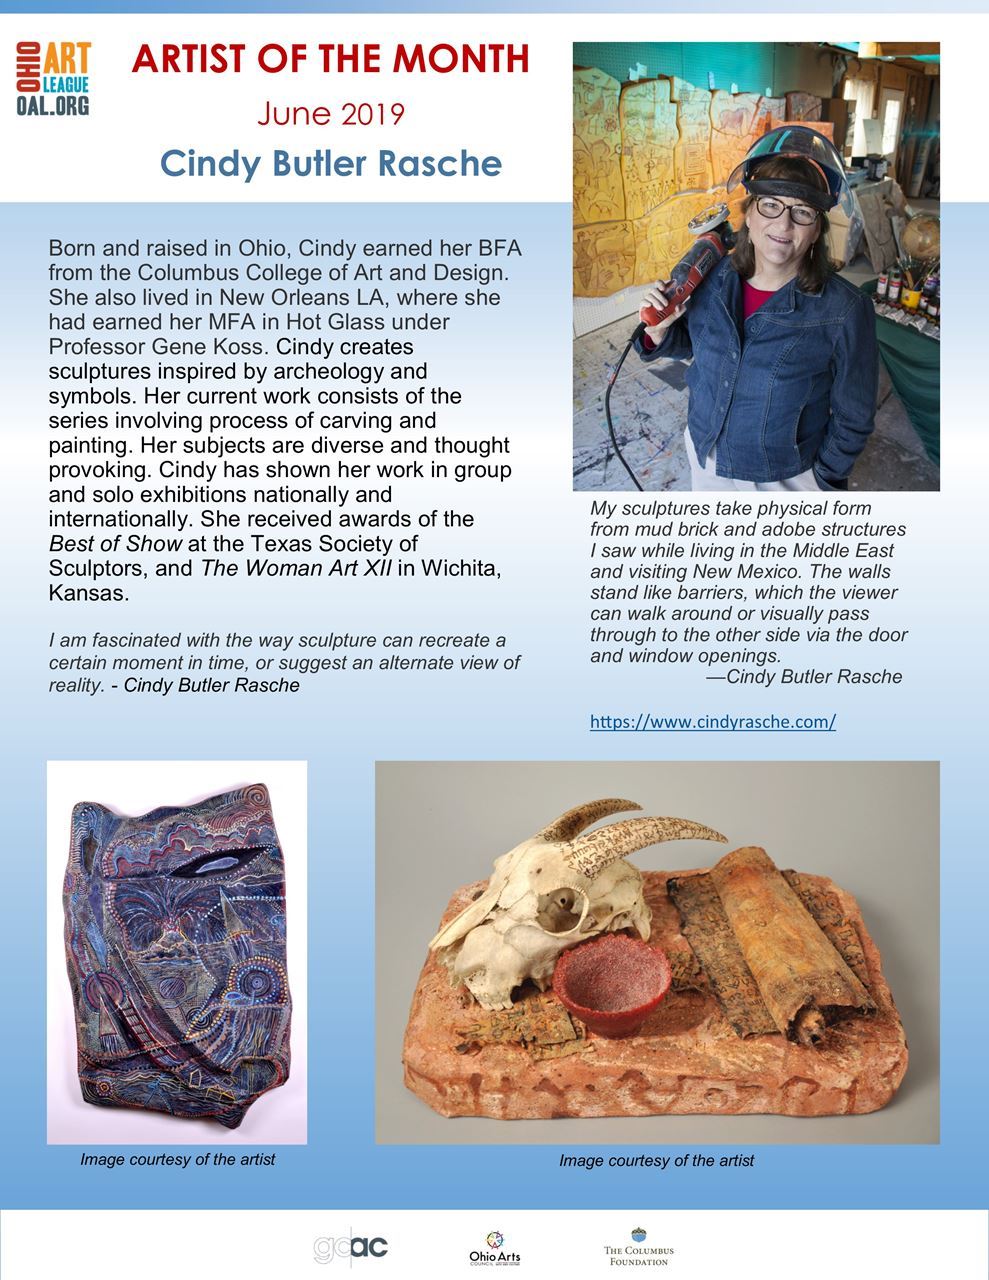 Artist of the month June 2019 - Cindy Butler Rasche. Born and raised on Ohio, Cindy earned her BFA from the Columbus College of Art and Design. She also lived in New Orleans, LA, where she had earned her MFA in Hot Glass under Professor Gene Koss.  Cindy creates sculptures inspired by archeology and symbols. Her current work consists of the series involving prossess of carving and painting. Her subjects are divers and thought provoking. Cindy has shown her work in group and solo exhibitions nationally and internationally. She received awards of the Best of Show at the Texas Society of Suclptures, and The Woman Art XII in Wichita, Kansas.  "I am fascinated with the way sculputre can recreate a certain moment in time, or suggest an alternate view of reality. - Cindy Butler Rasche "My Sculptures take physical form from mud brick and adobe structures I saw while living in the middle East and visiting New Mexico. The walls stand like barriers, which their viewer can walk around or visually pass through to the other side via the door and window openings. - Cindy Butler Rasche